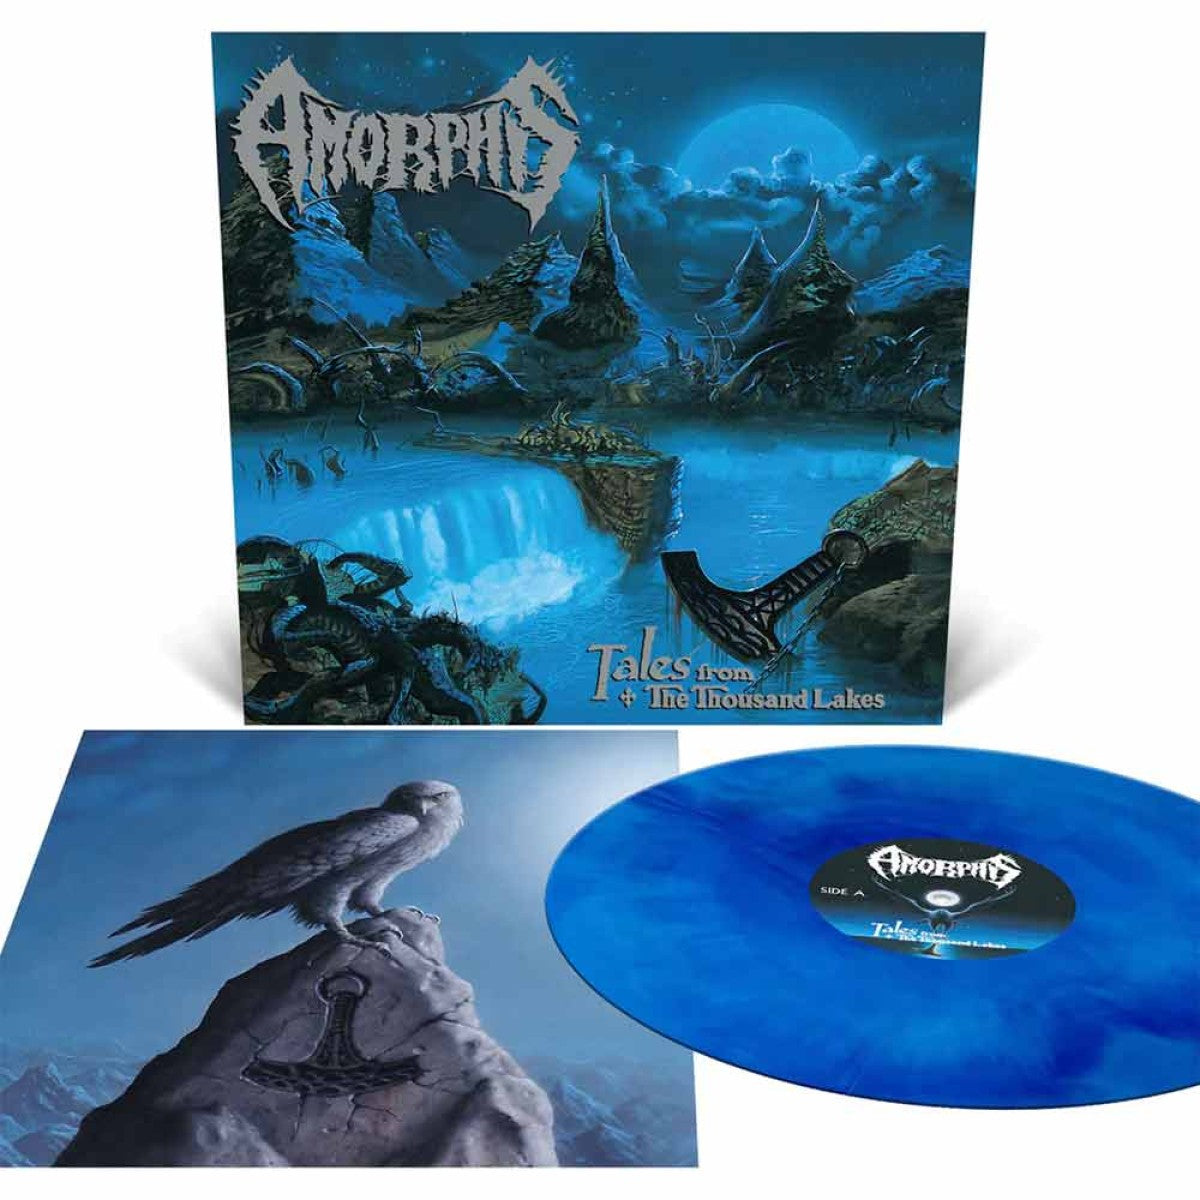 Amorphis "Tales From The Thousand Lakes" Royal Bue / Baby Blue Merge Vinyl